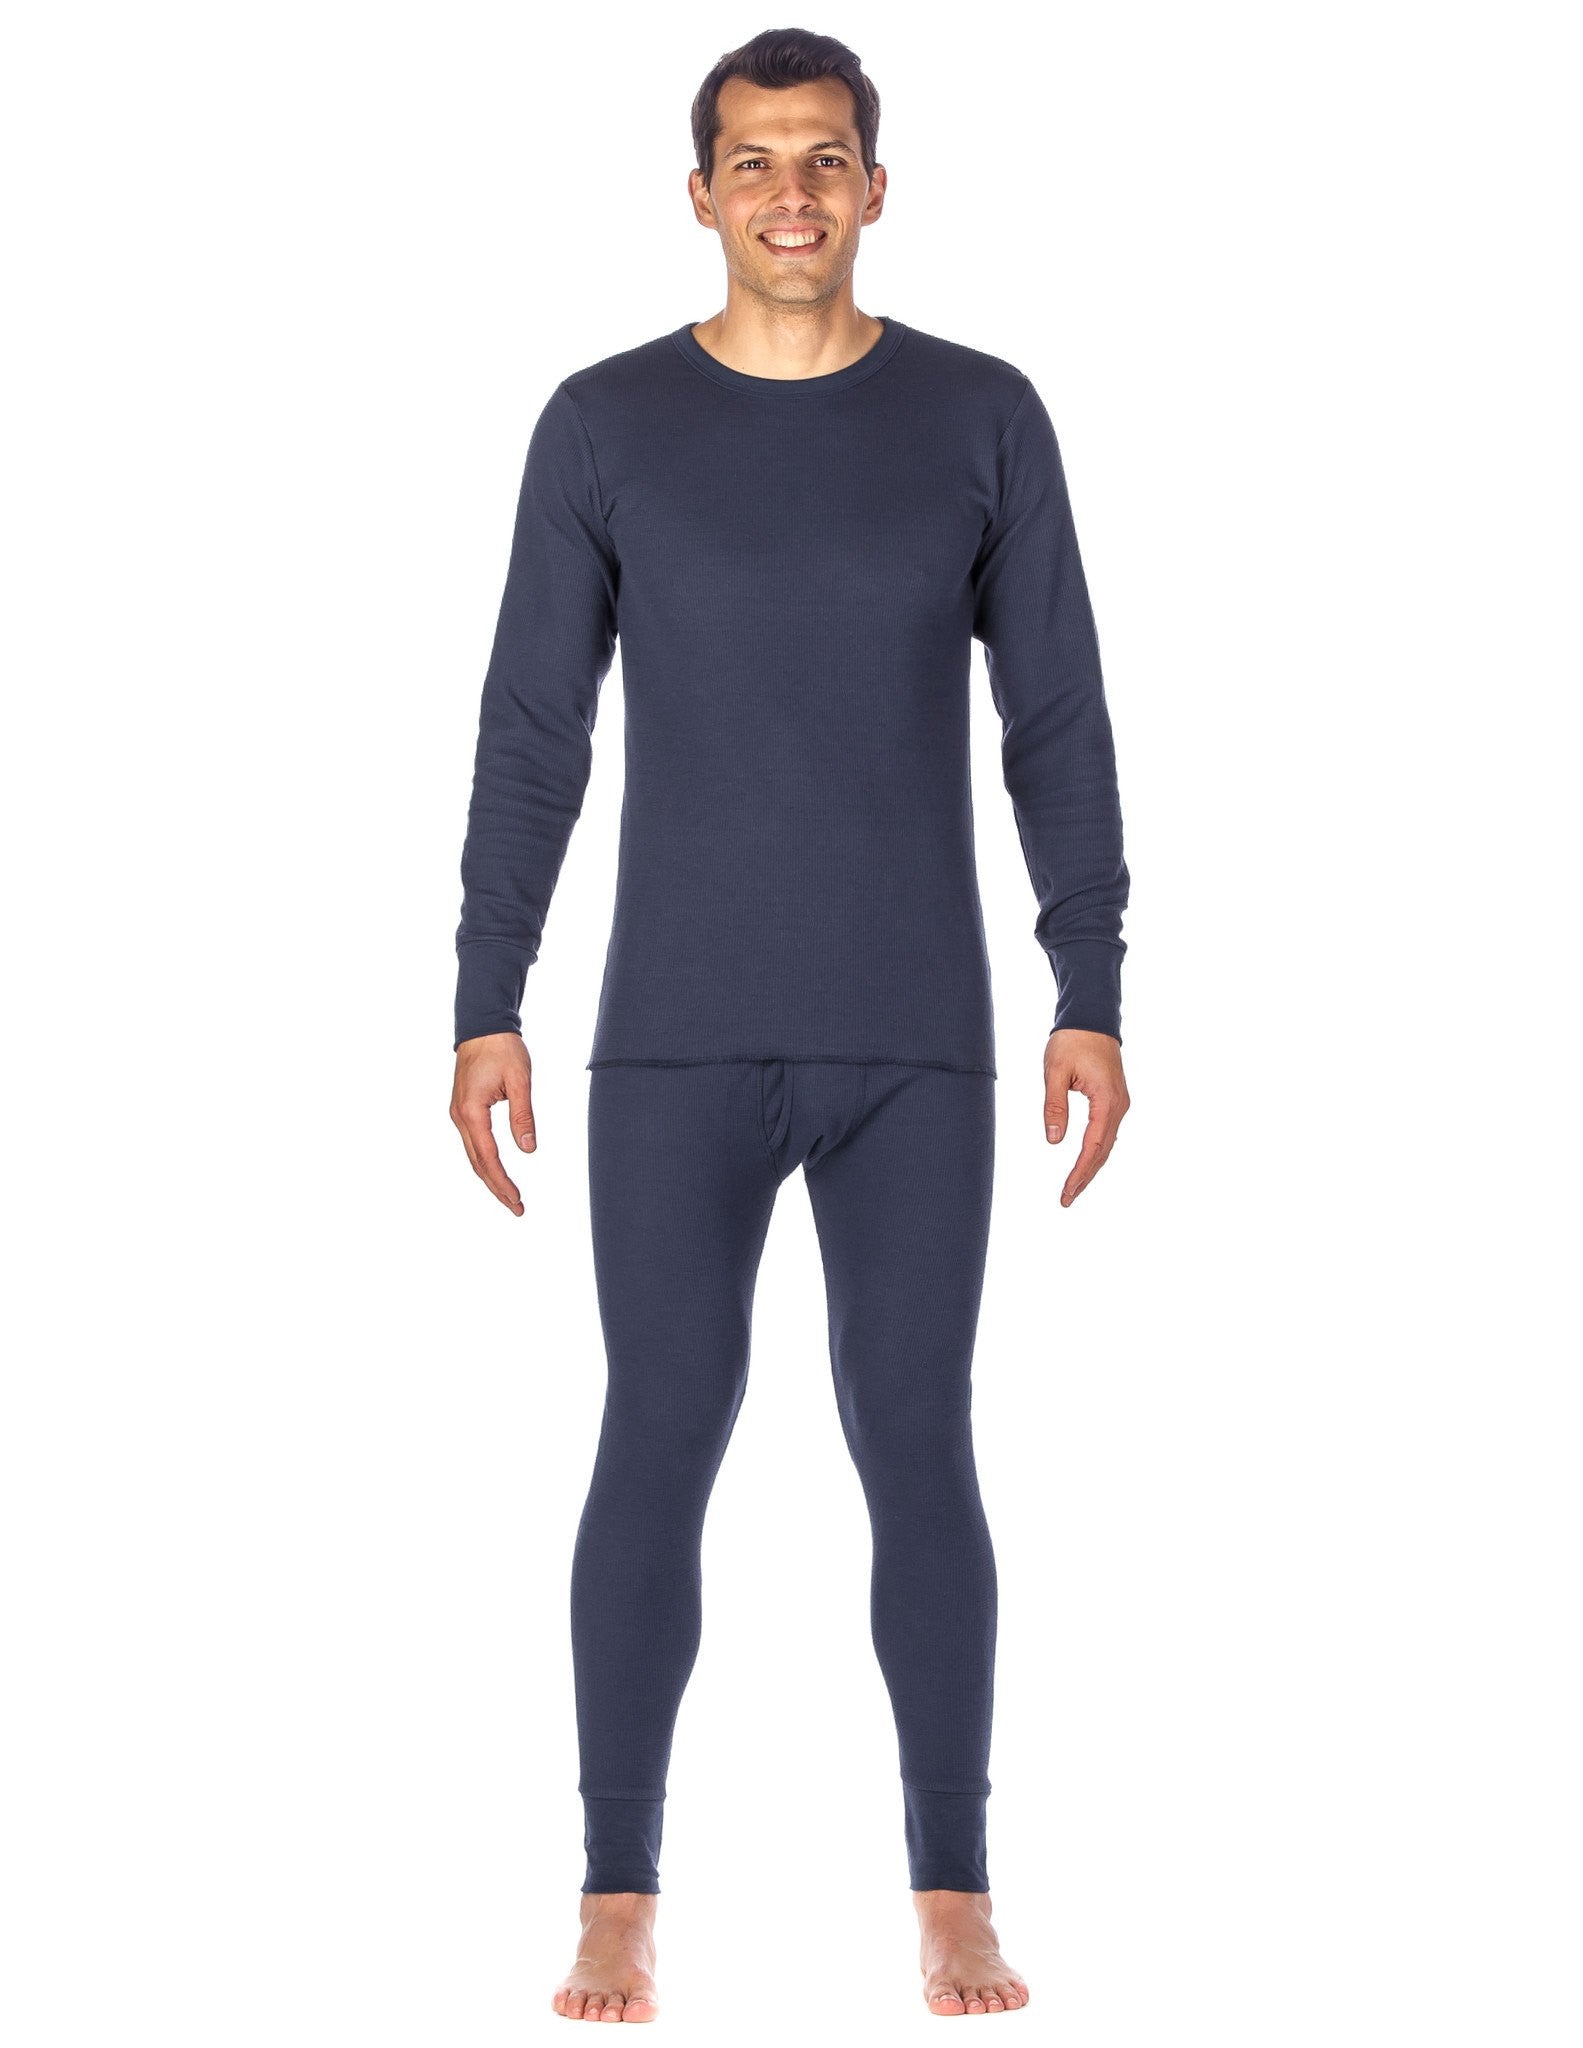 Noble Mount Men's Extreme Cold Thermal Top & Bottom Set